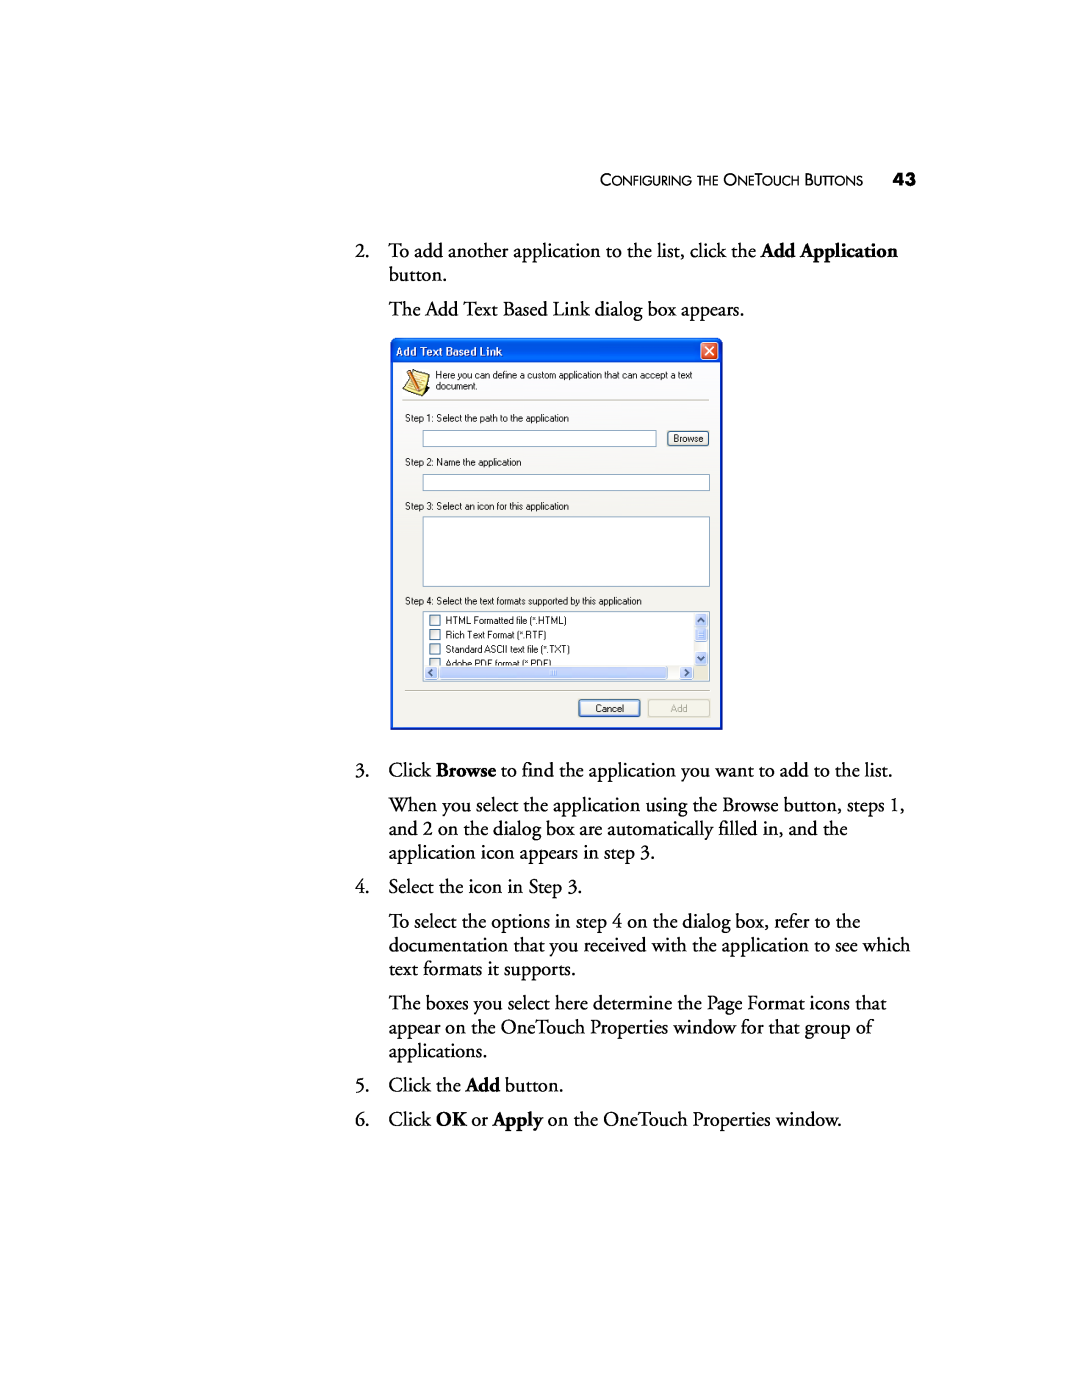 Visioneer XP 470 manual The Add Text Based Link dialog box appears 